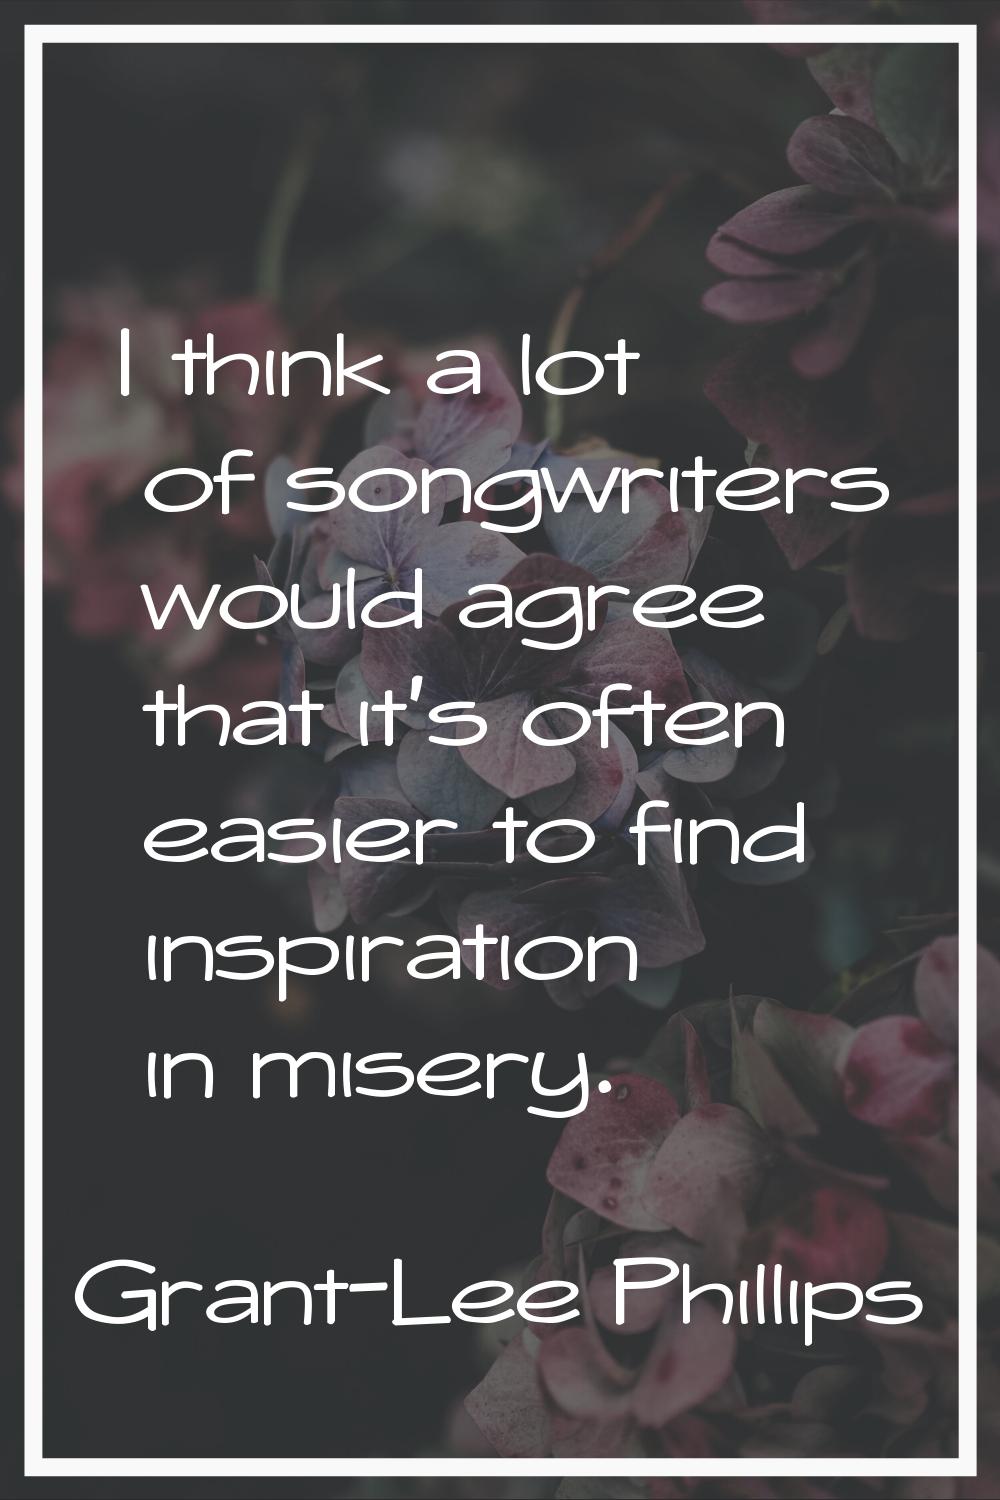 I think a lot of songwriters would agree that it's often easier to find inspiration in misery.